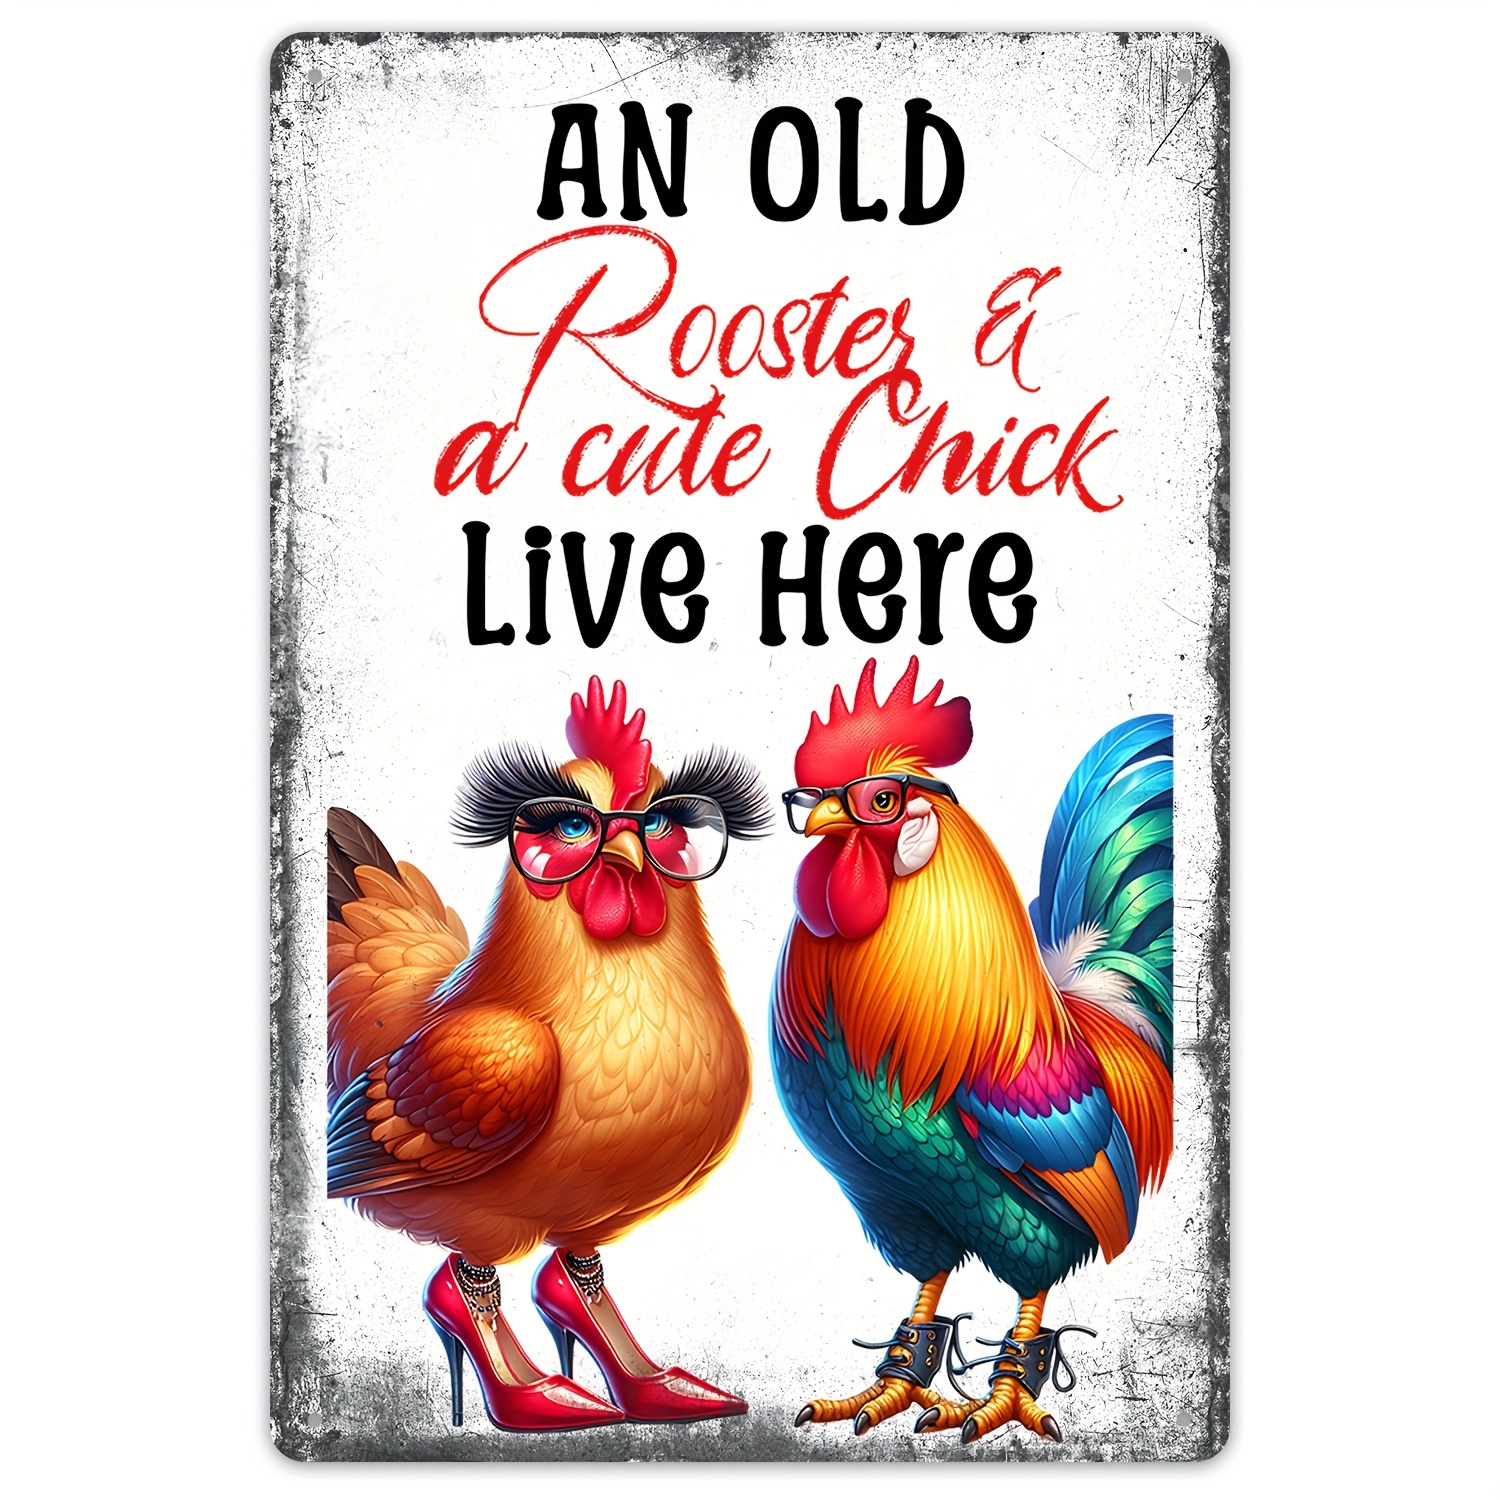 

Waterproof Metal Chicken Sign, Vintage Style "an Old Rooster & A Cute Chick Live Here" Wall Decor For Home, Guest Room, Office, Den - Pre-drilled, Weather-resistant, Durable - 1pc, 20x30cm